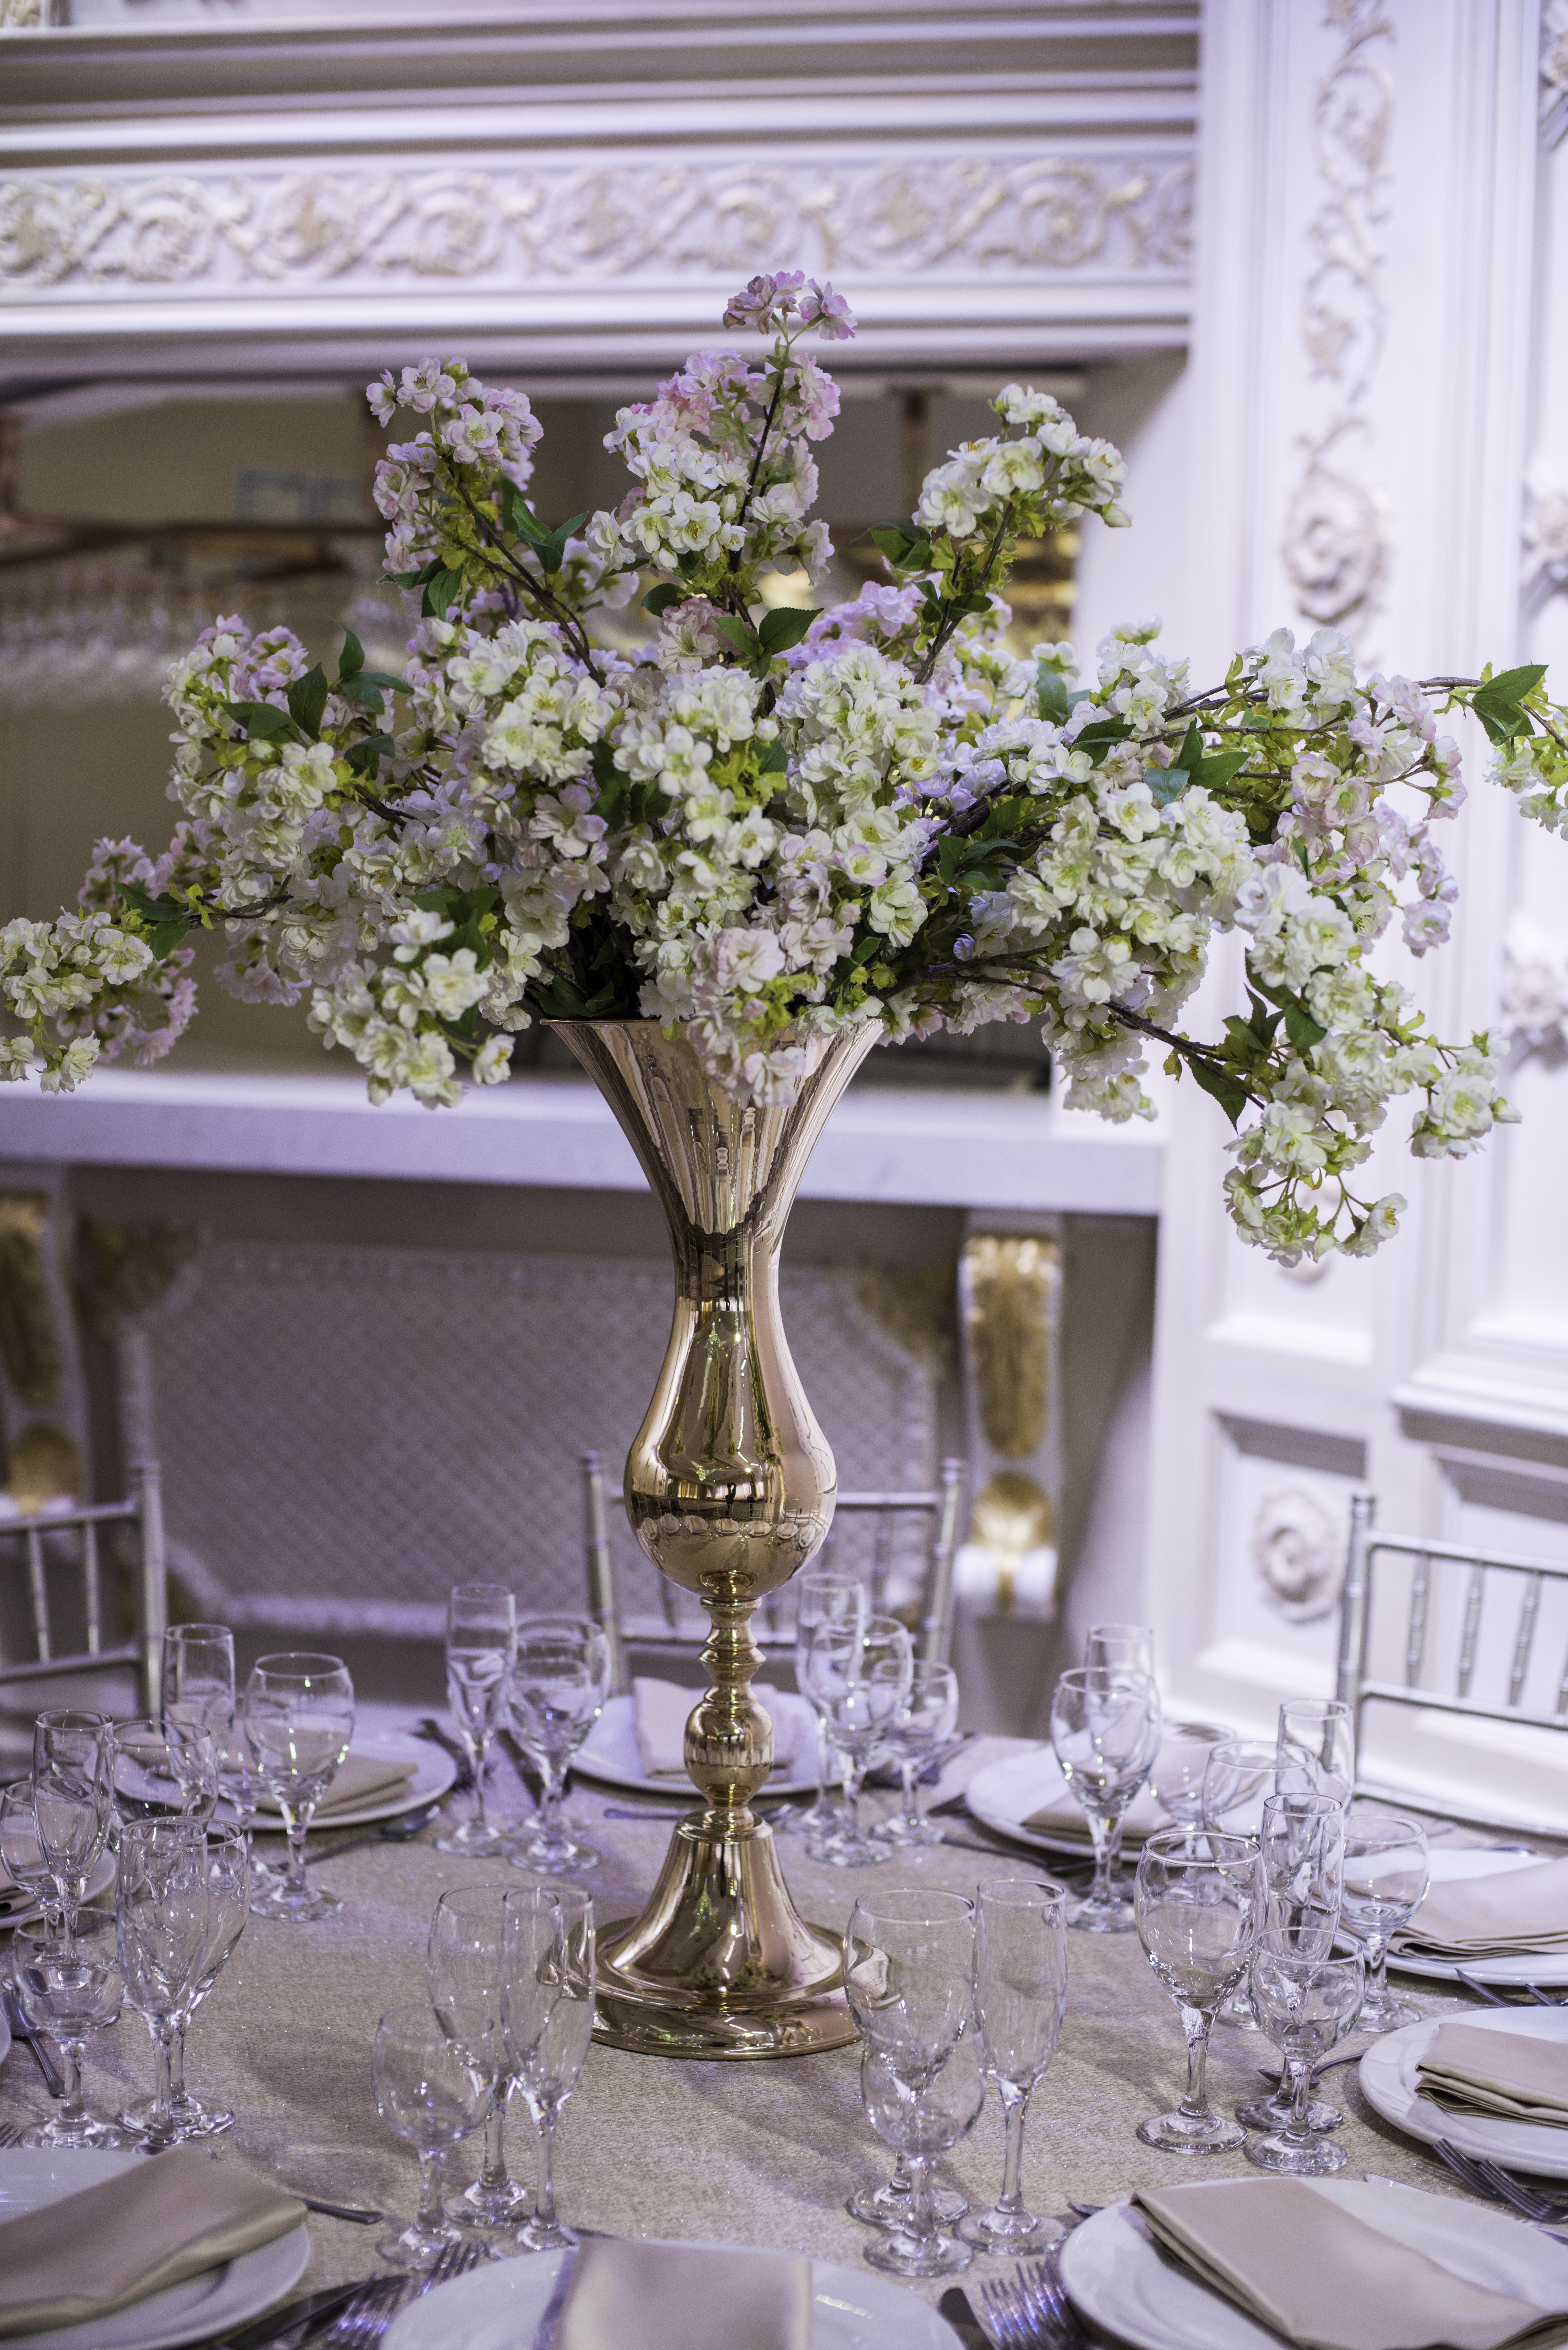 A reflective gold vase with white flowers set on a round table with wedding table setting.